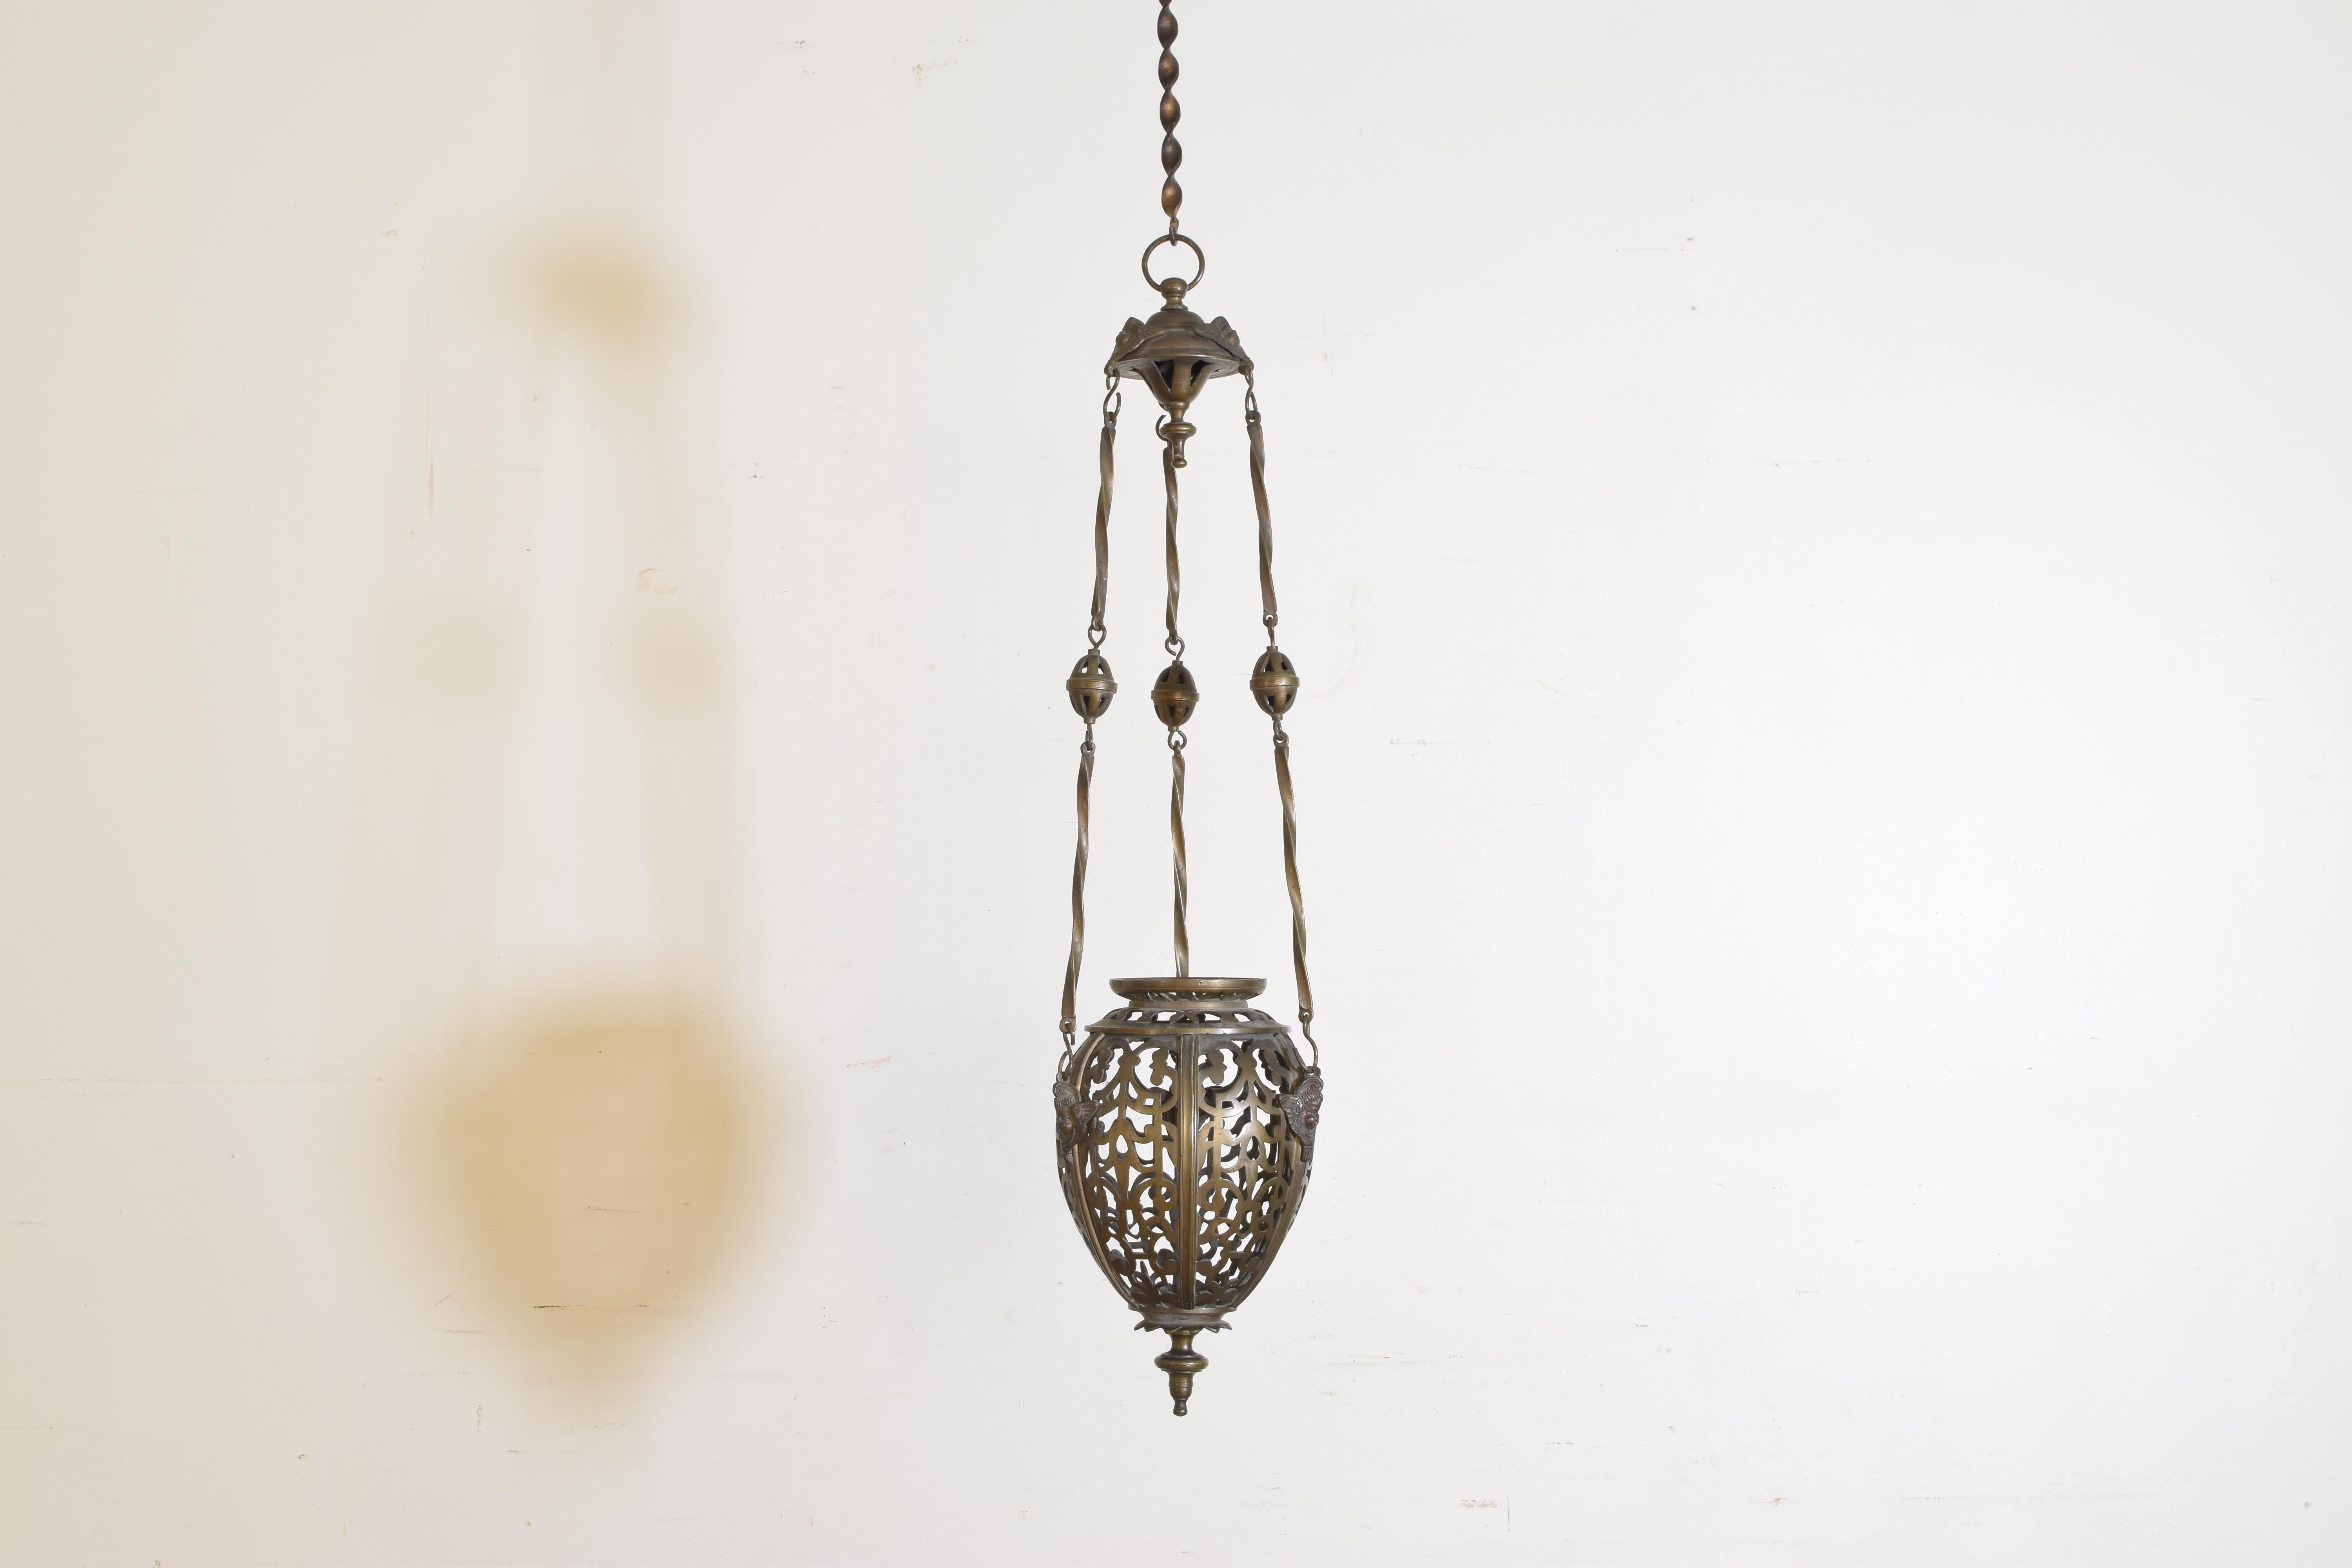 The oval shaped pierced bronze incense burner hanging from twisting rods and an original canopy, easily converted to a lantern.